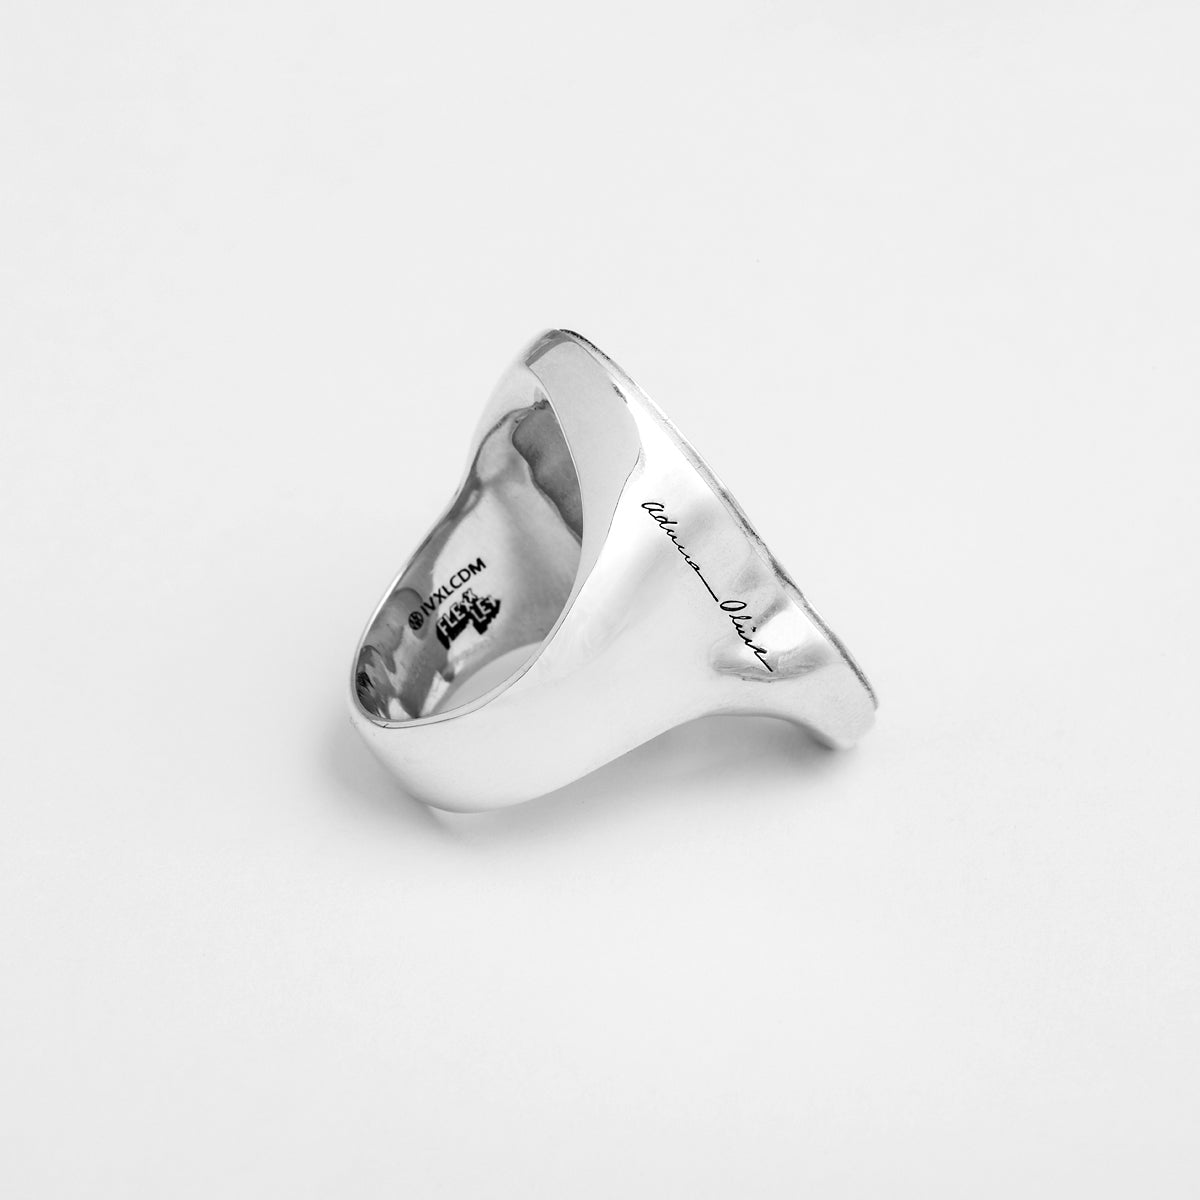 Adriana Oliver - 'Portrait' Woman Ring